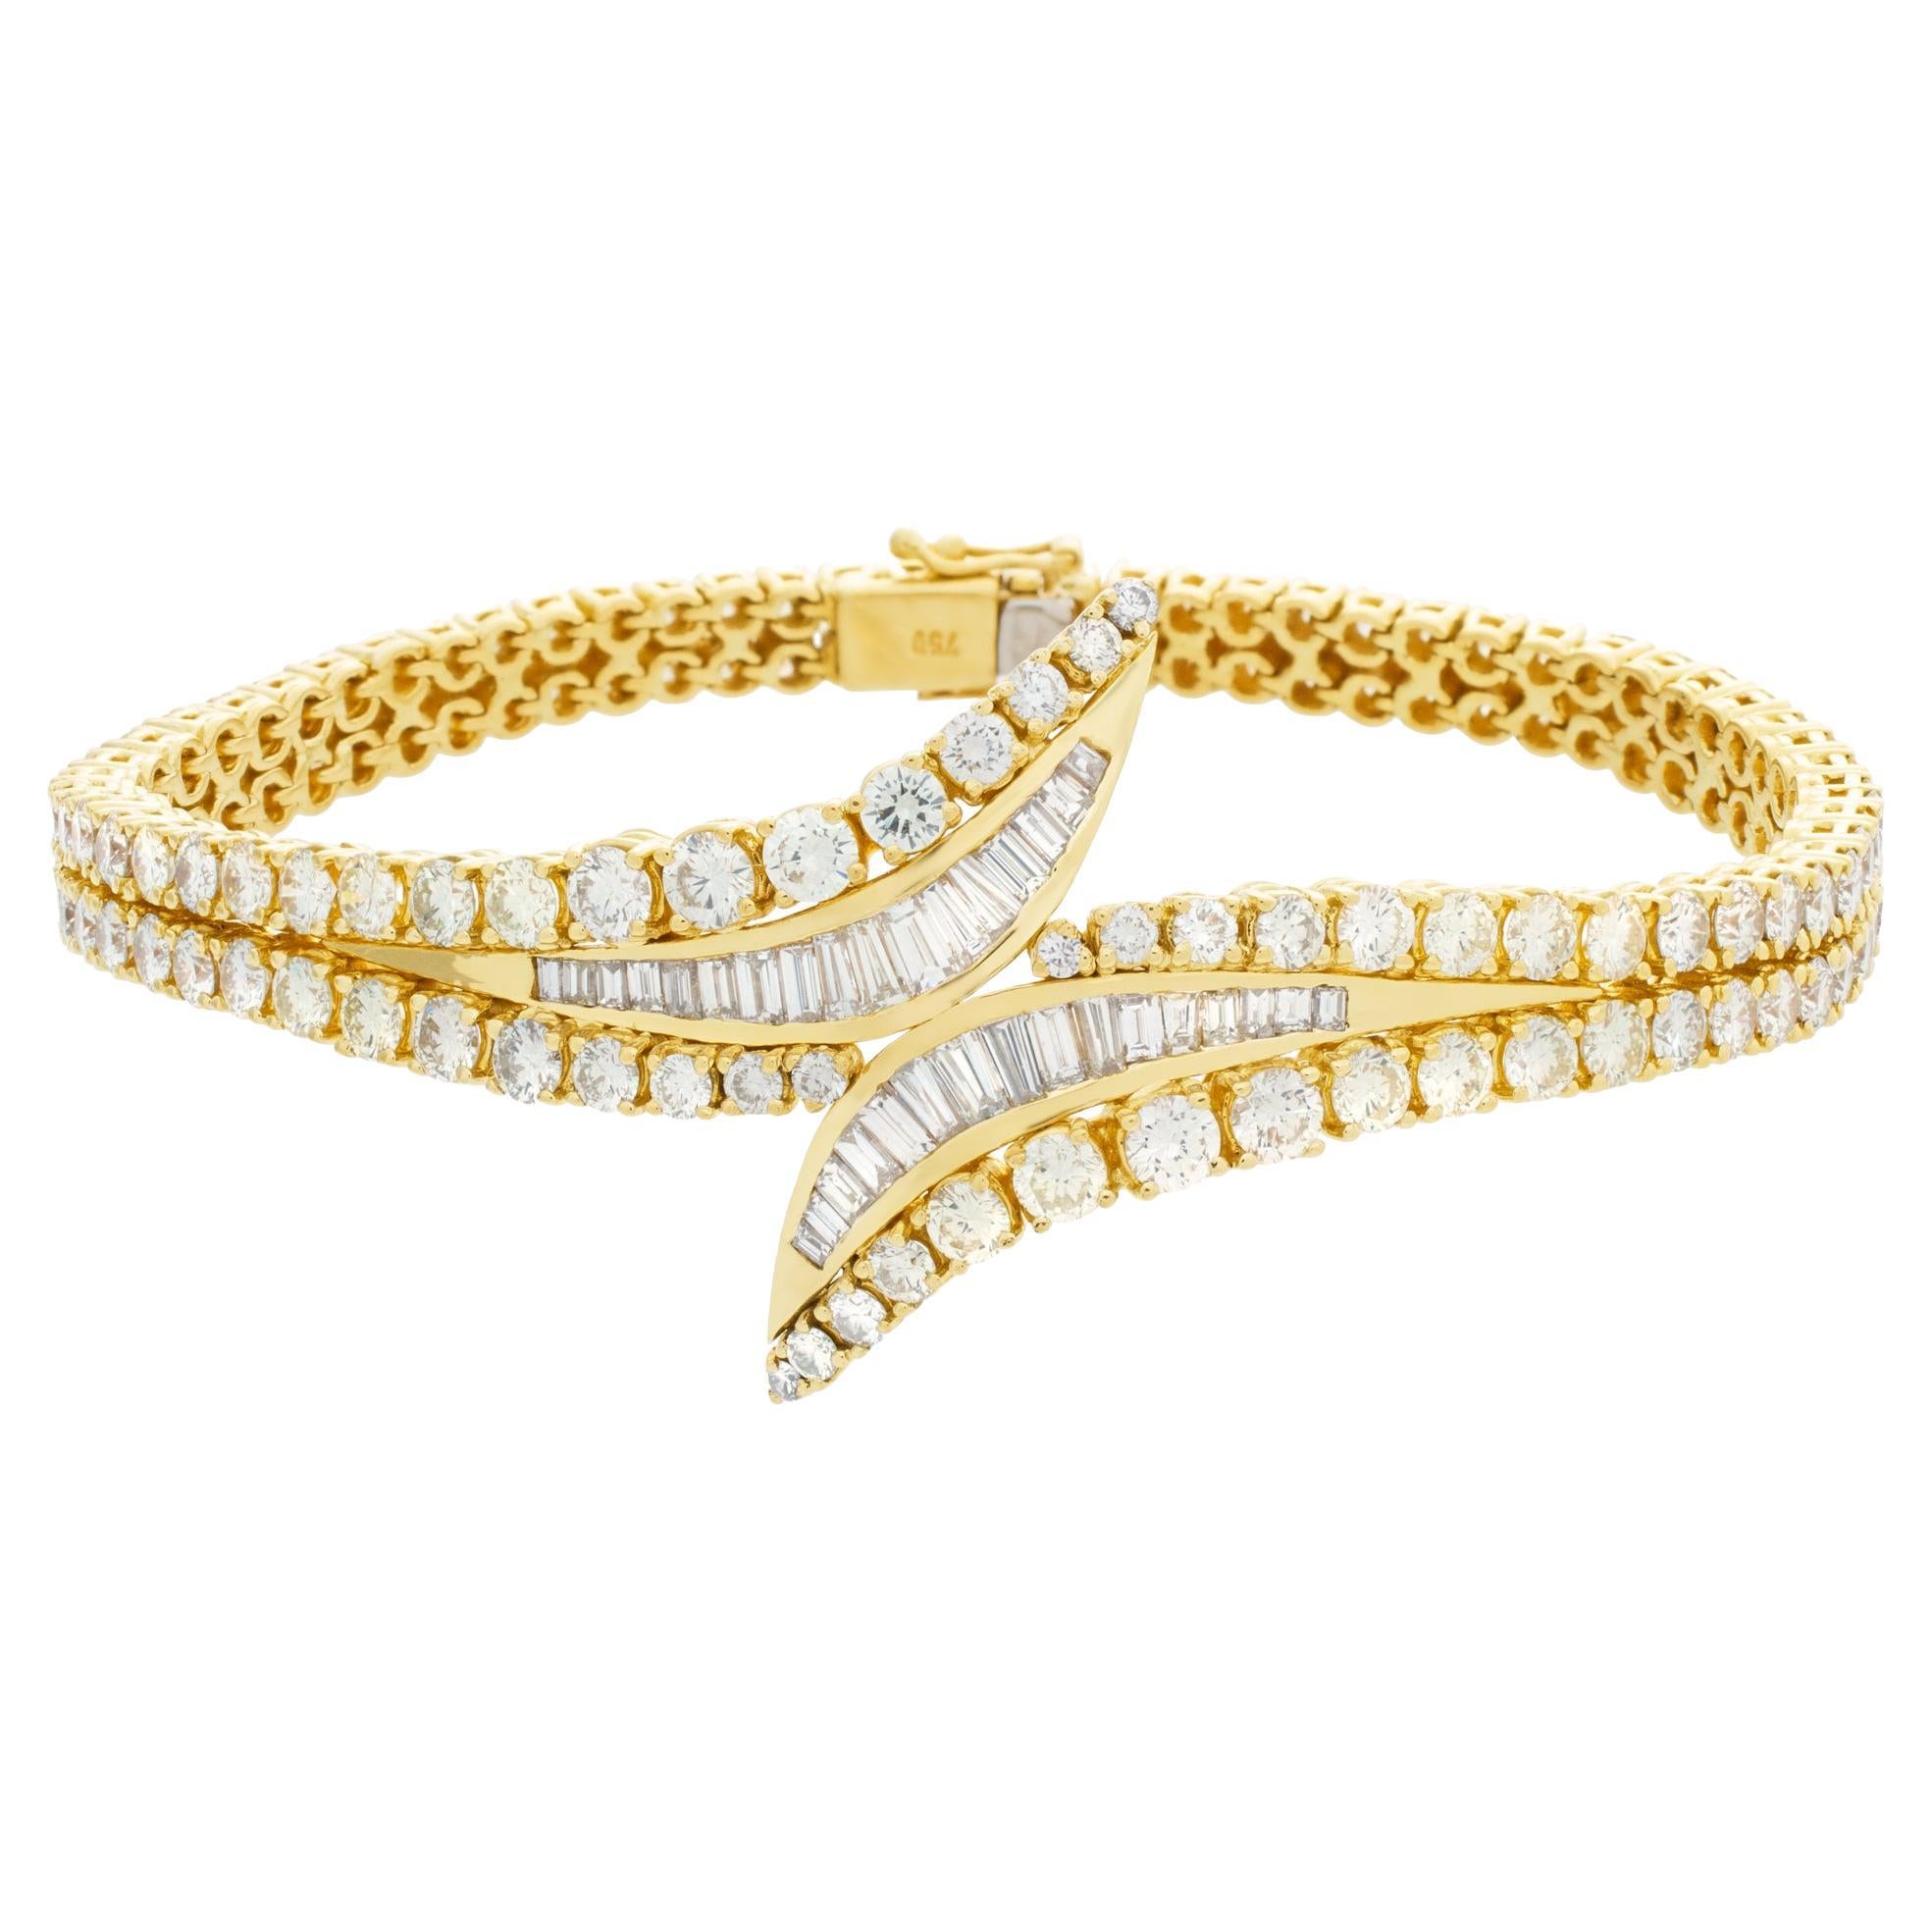 Bracelet in 18k Yellow Gold with over 9 Carats in Round Brilliant Cut Diamonds